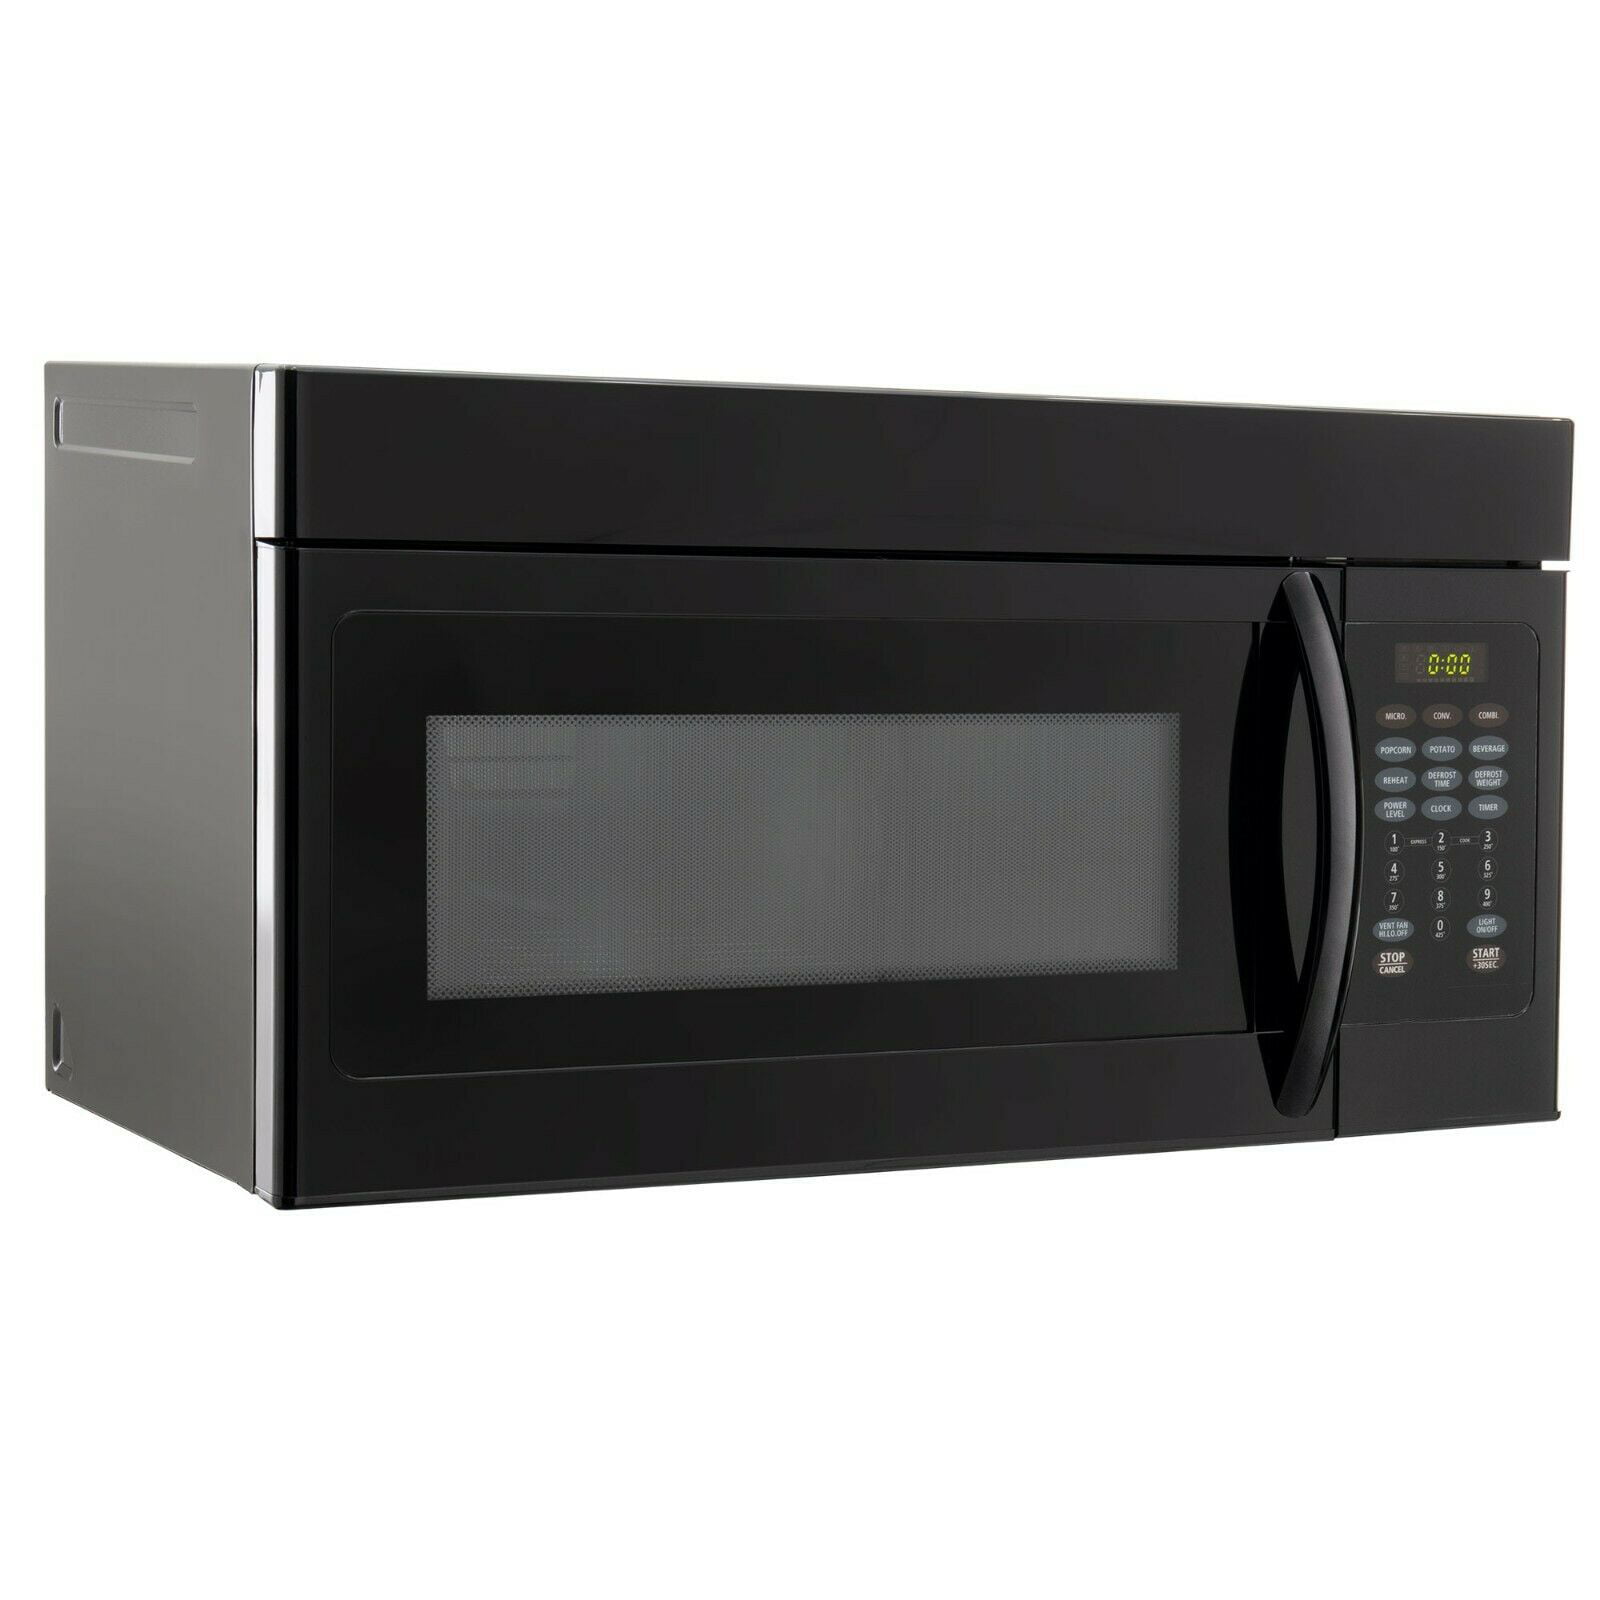 RV Microwave Over the Range Convection Oven 30" 120V Black Finish Above